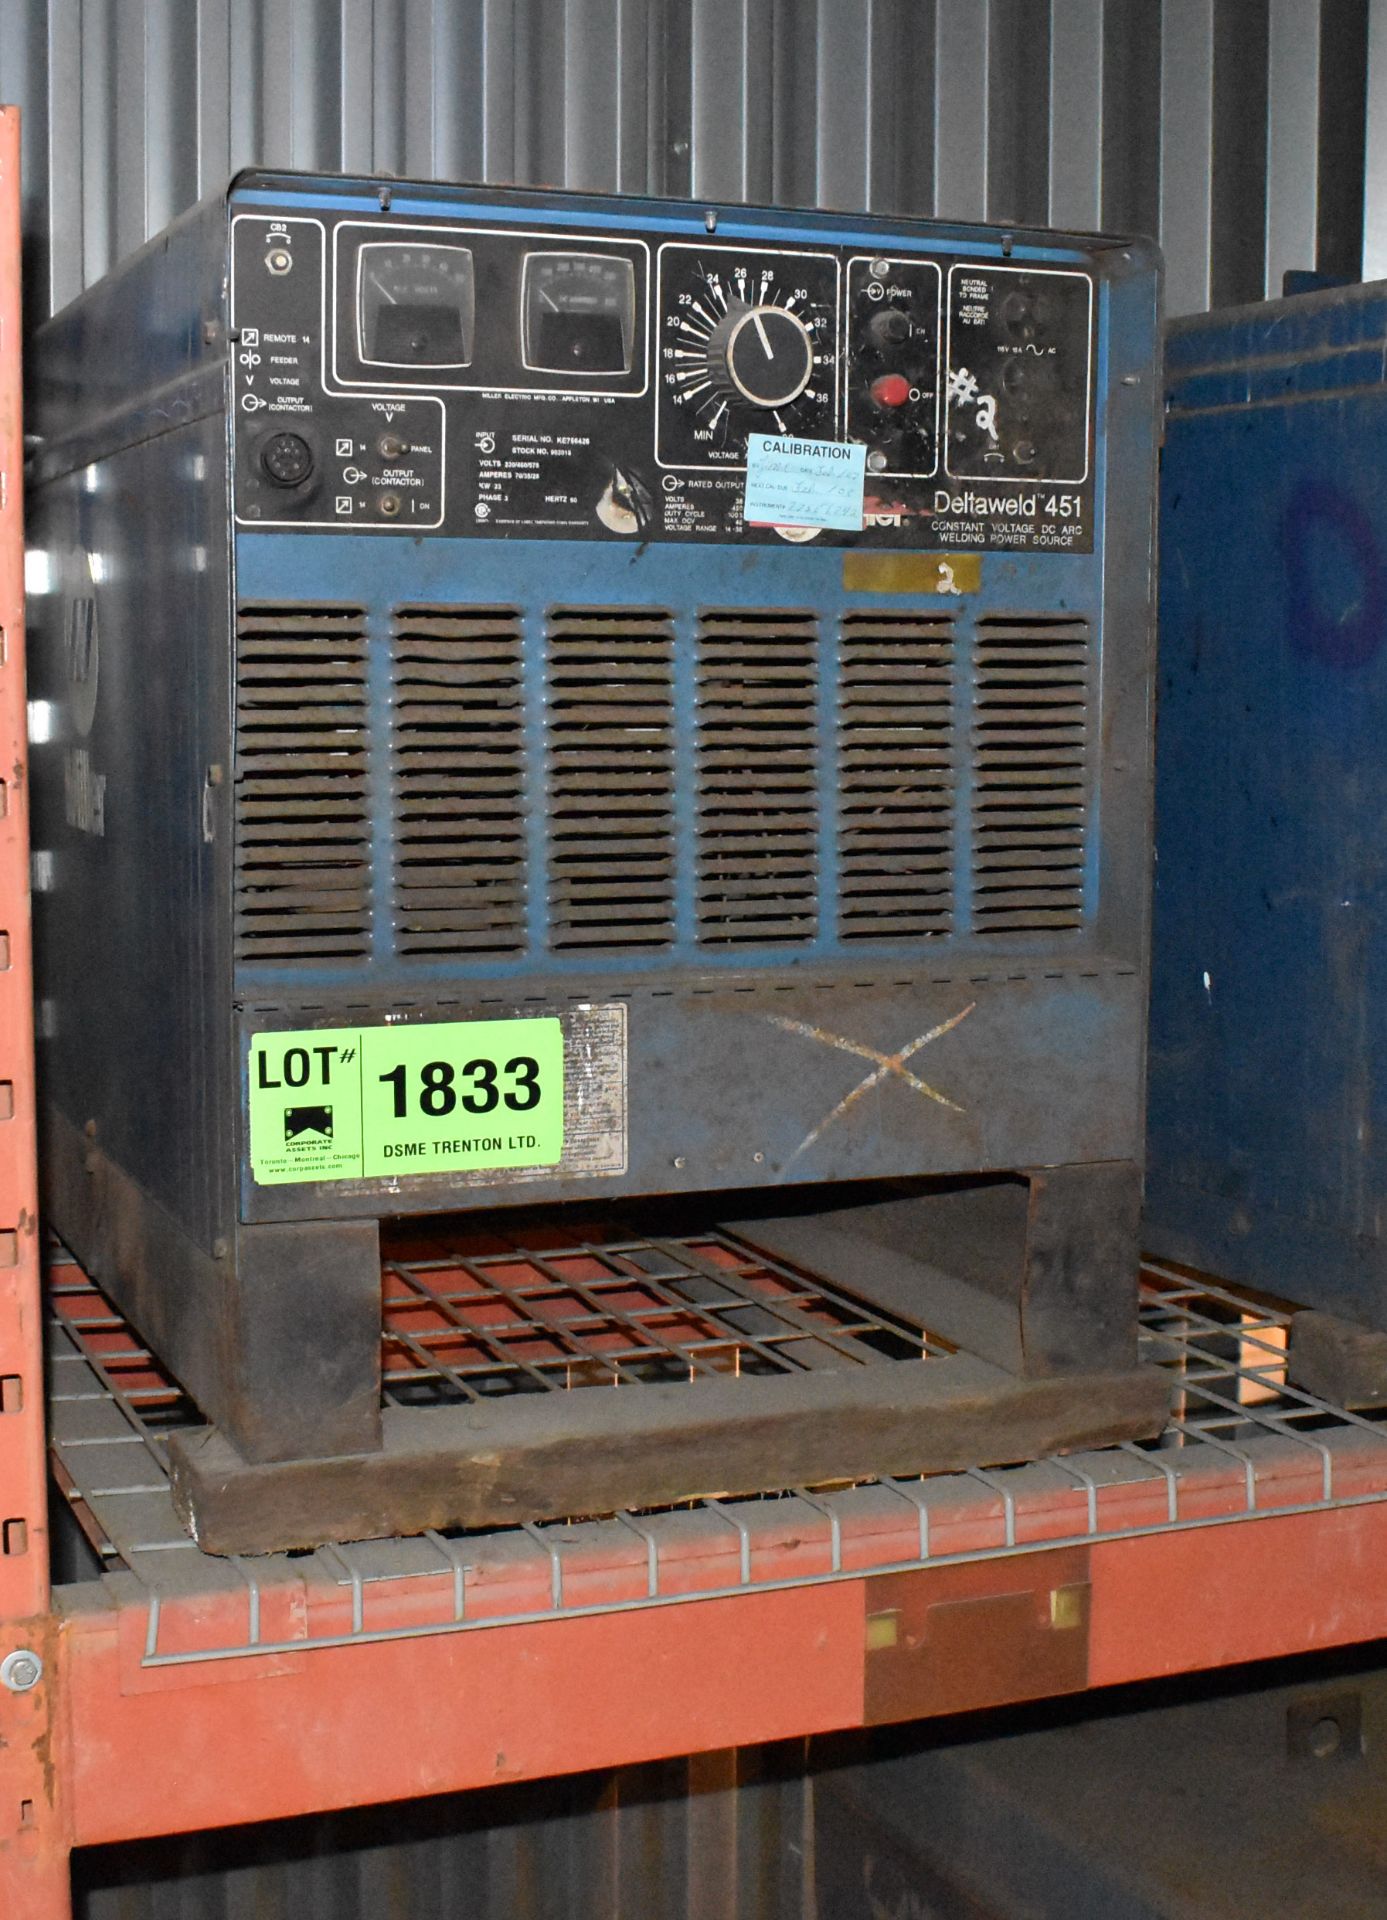 MILLER DELTAWELD 451 WELDING POWER SOURCE [RIGGING FEE FOR LOT# 1833 - $40 USD +PLUS TAXES]